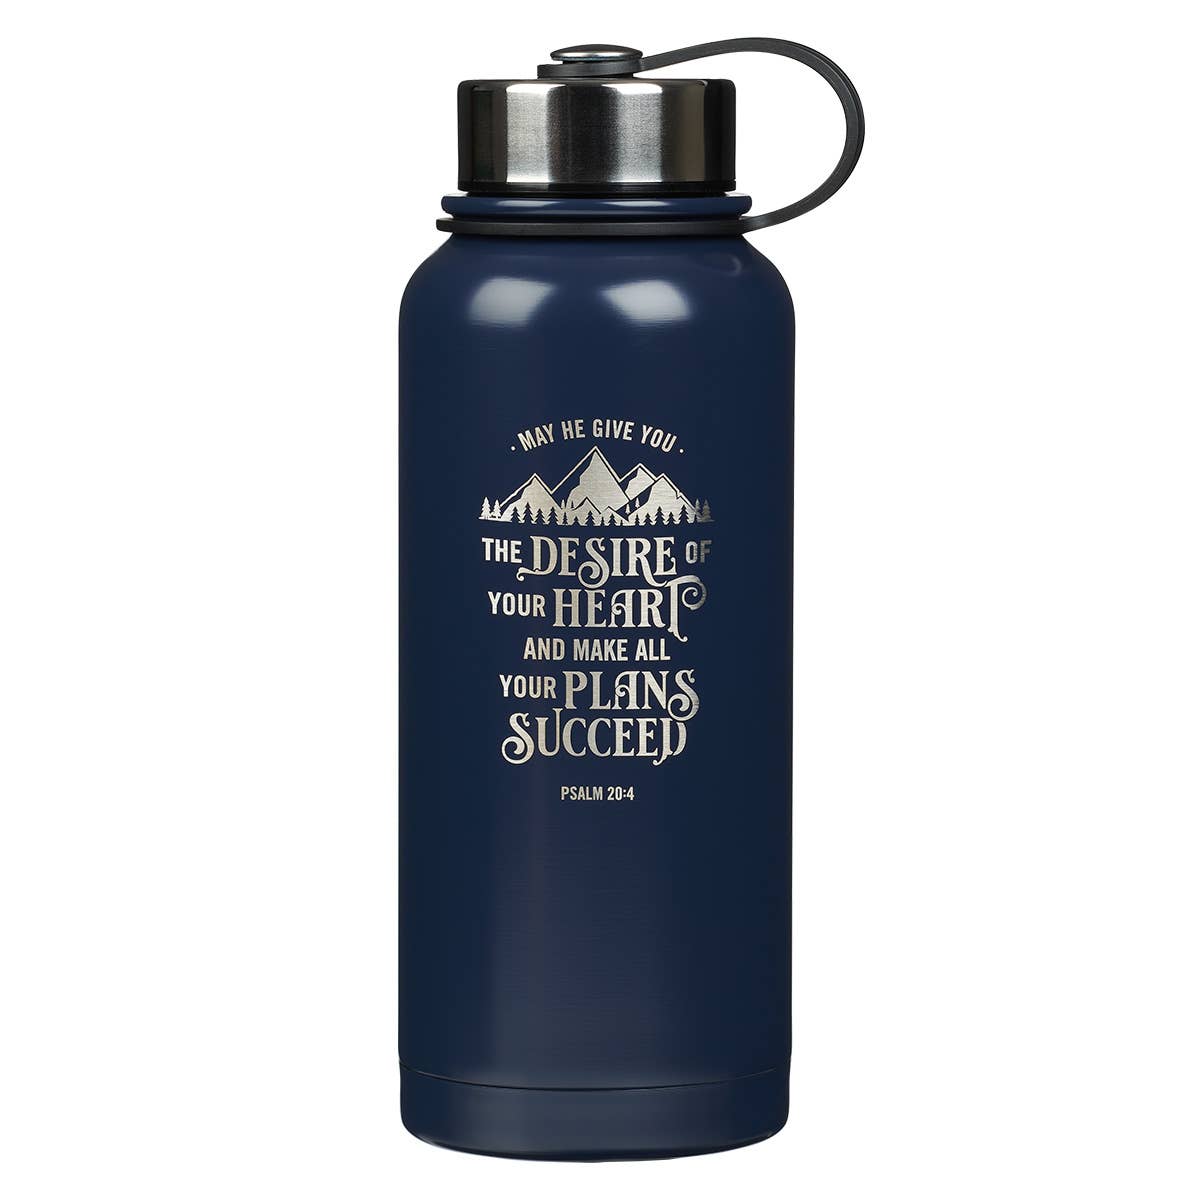 May He Give You....Navy Blue Stainless Steel Water Bottle